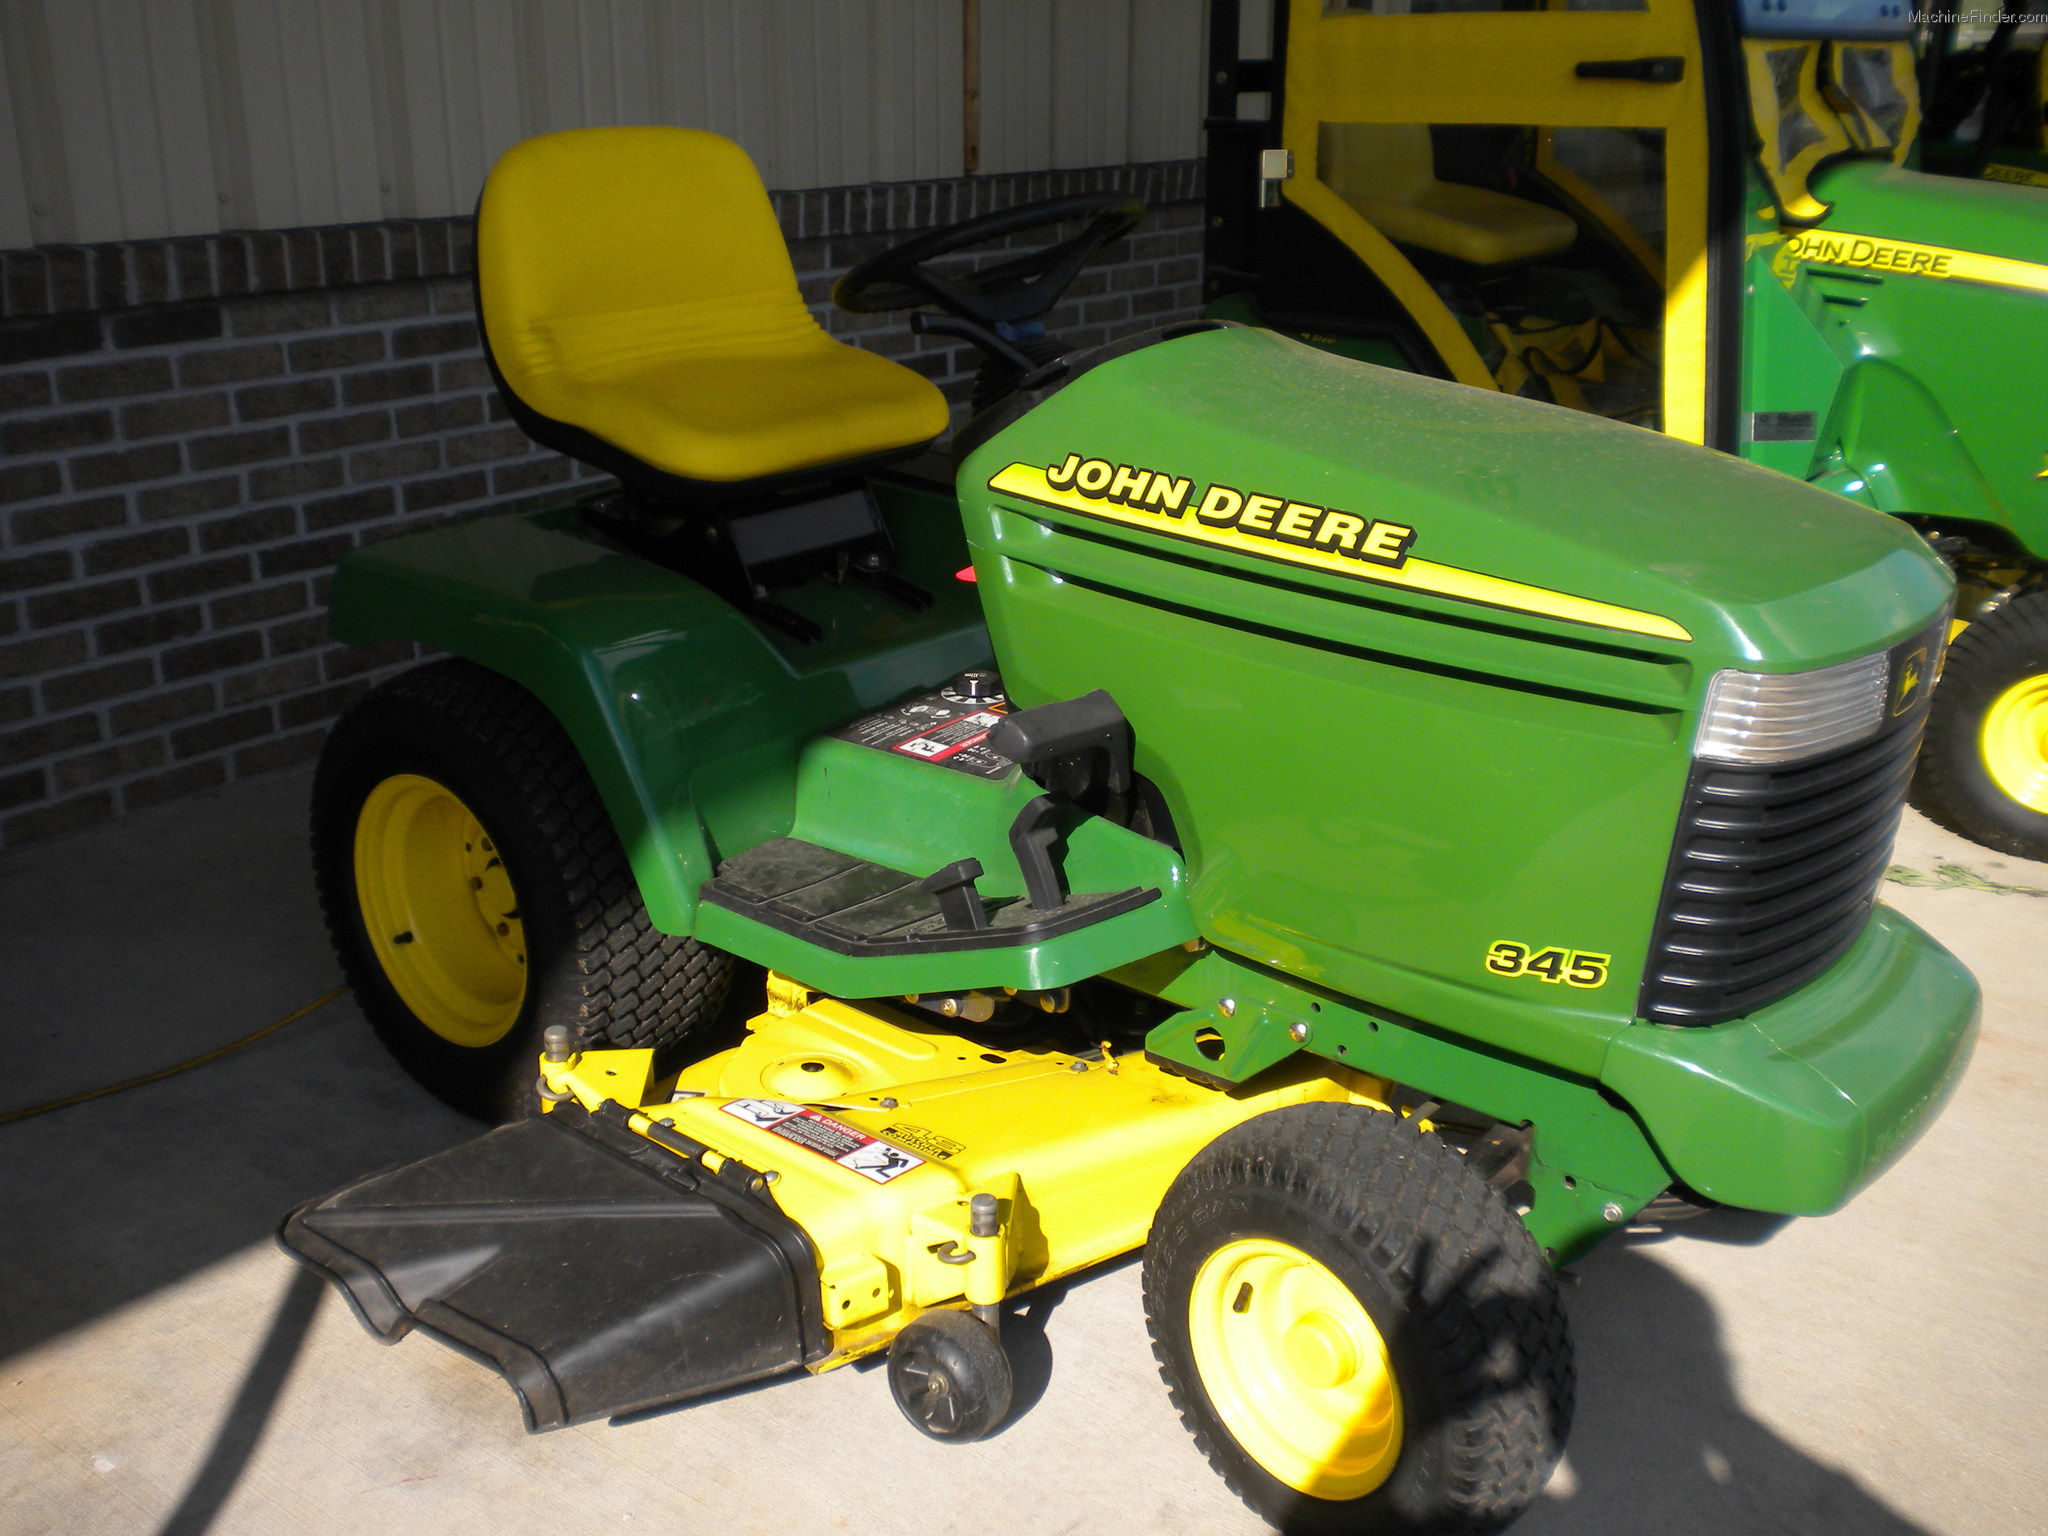 John Deere 345 Review This Engine Is No Longer Made